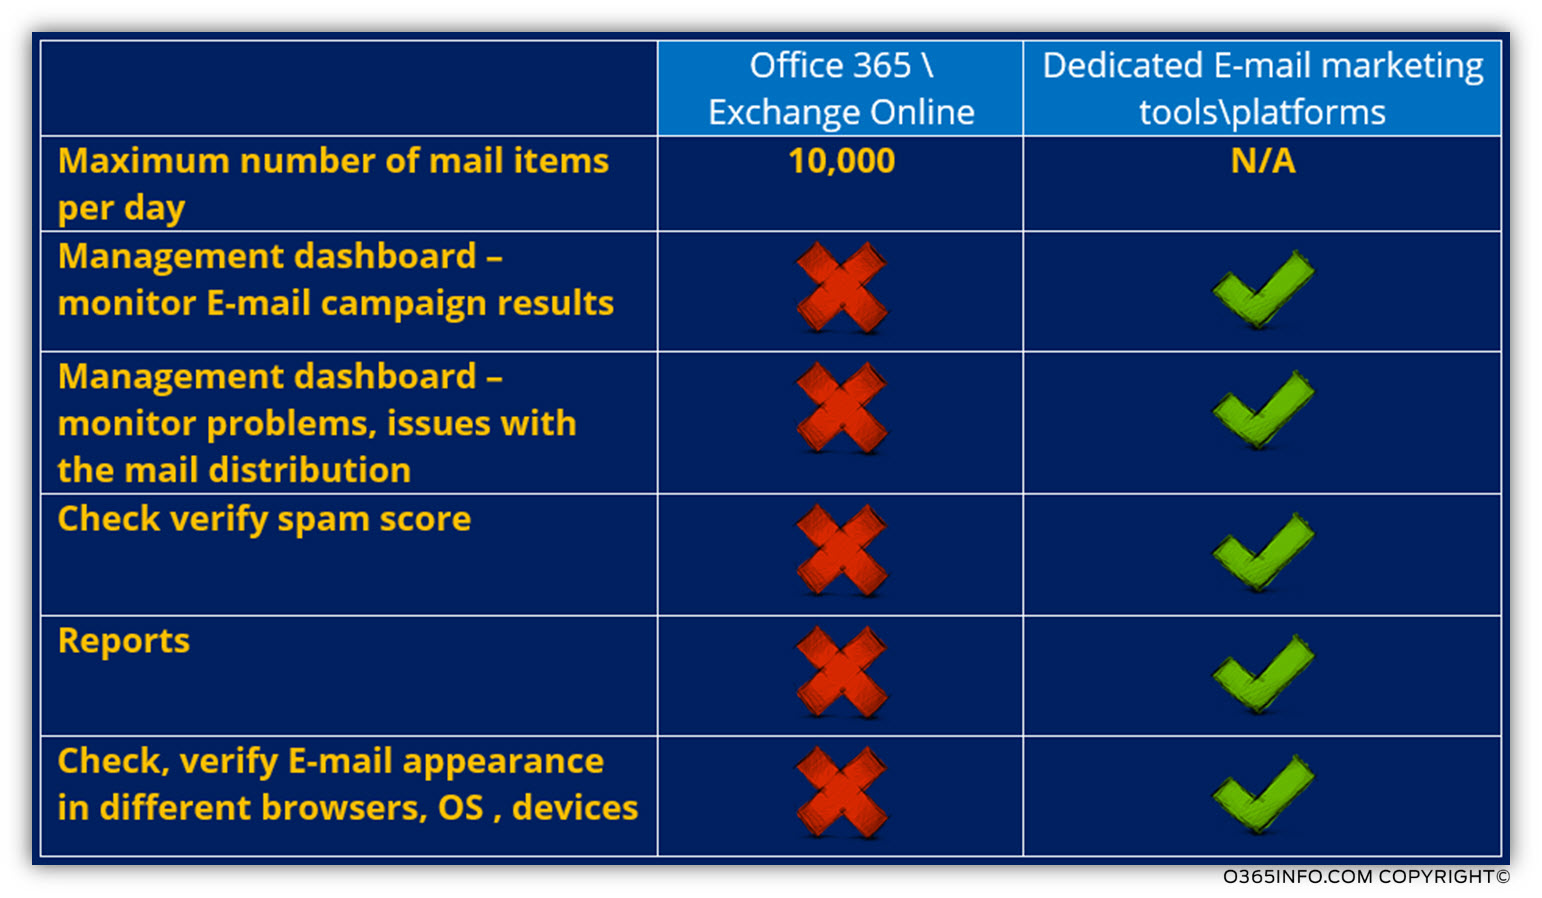 Office 365 Exchange Online is not suitable for the purpose of commercial E-mail-01